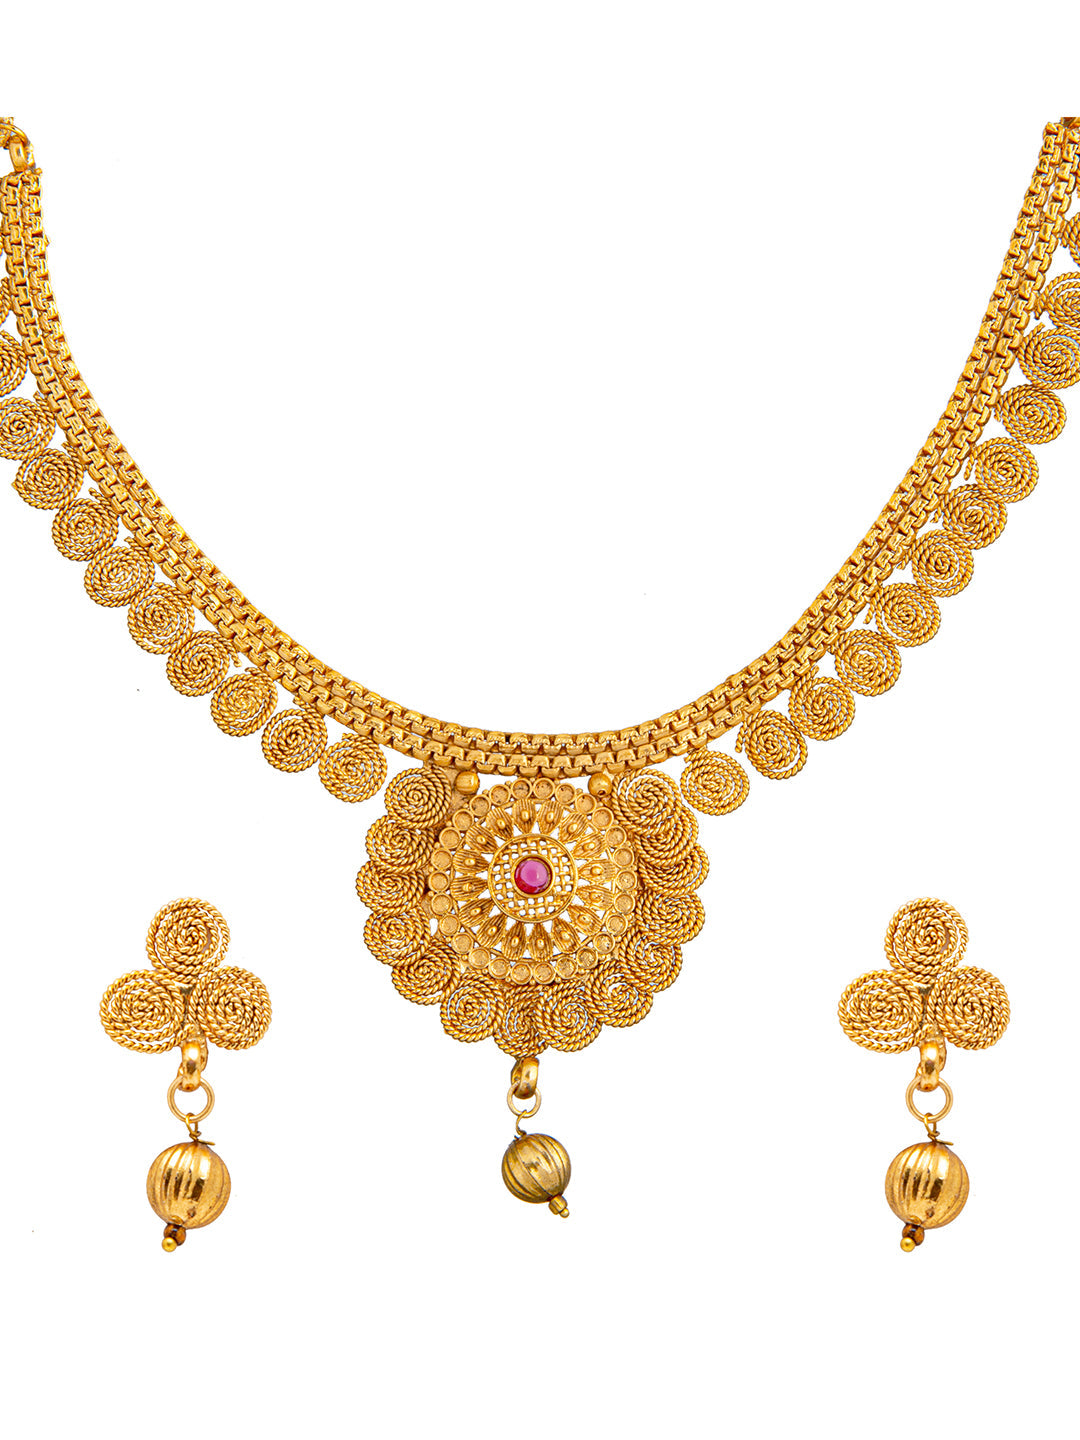 22K Gold Necklace & Drop Earrings Set with Beads - 235-GS3882 in 41.900  Grams